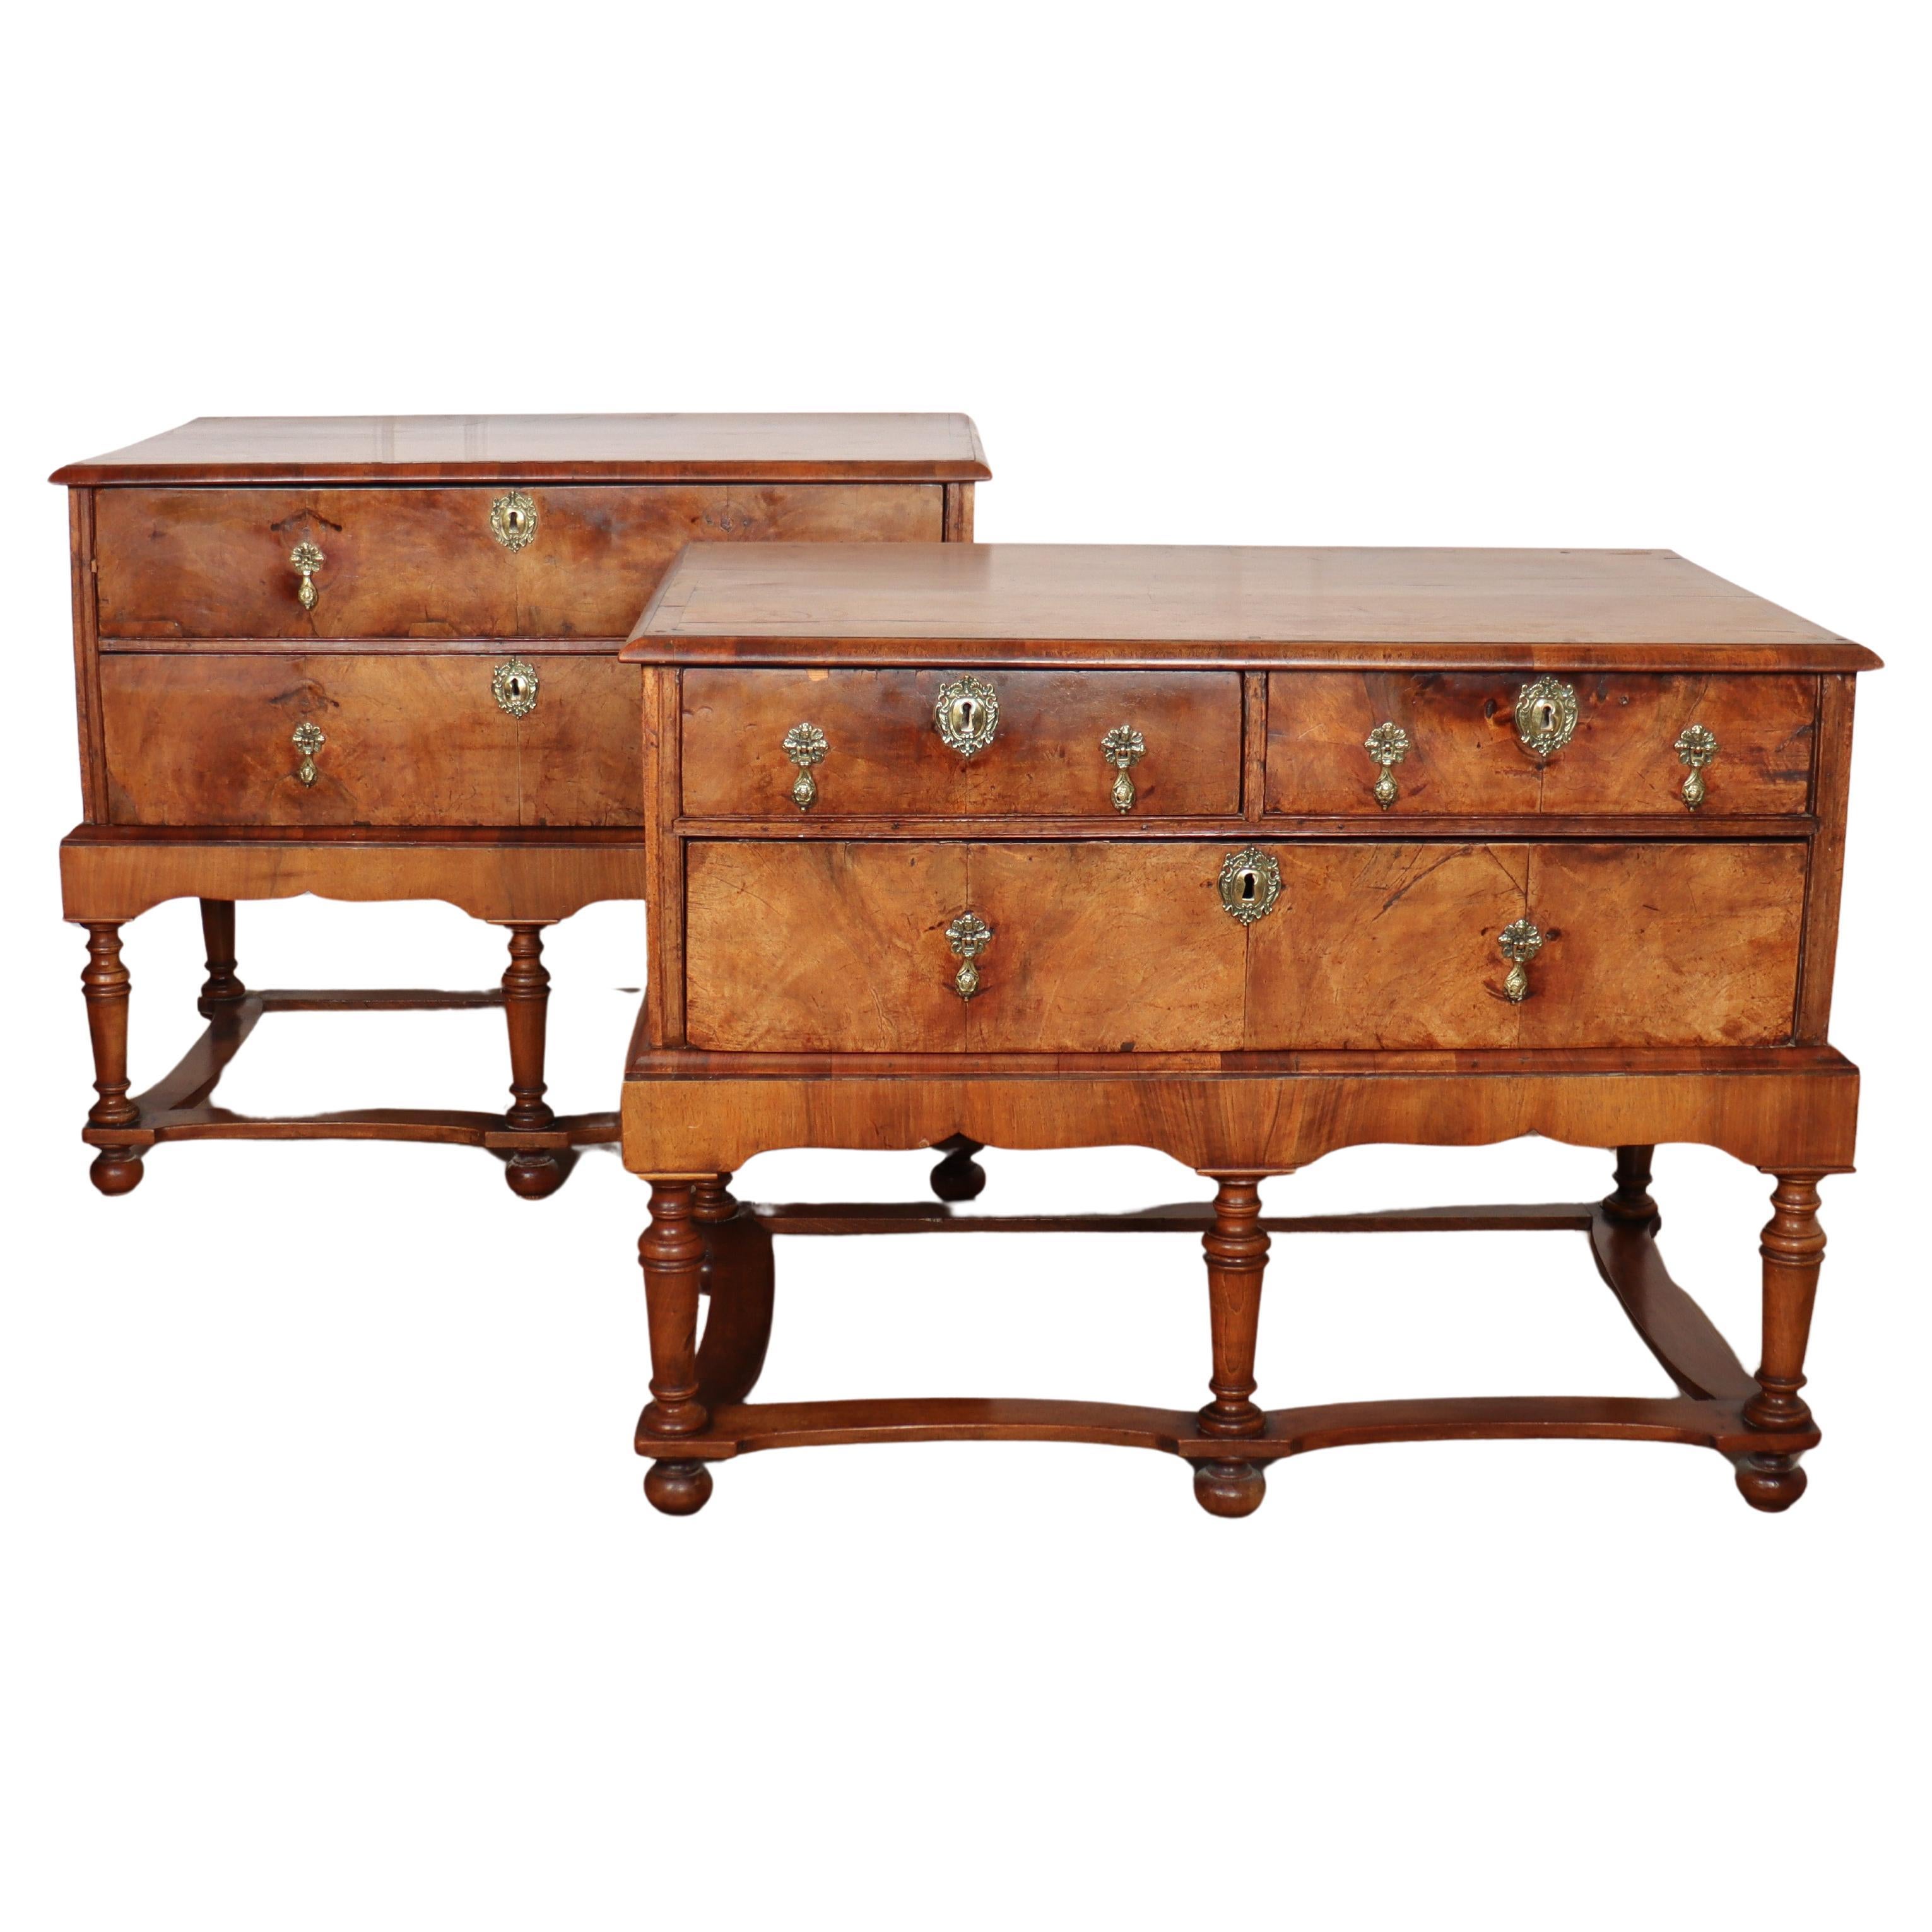 Near Pair of 18th Century Walnut Commodes For Sale